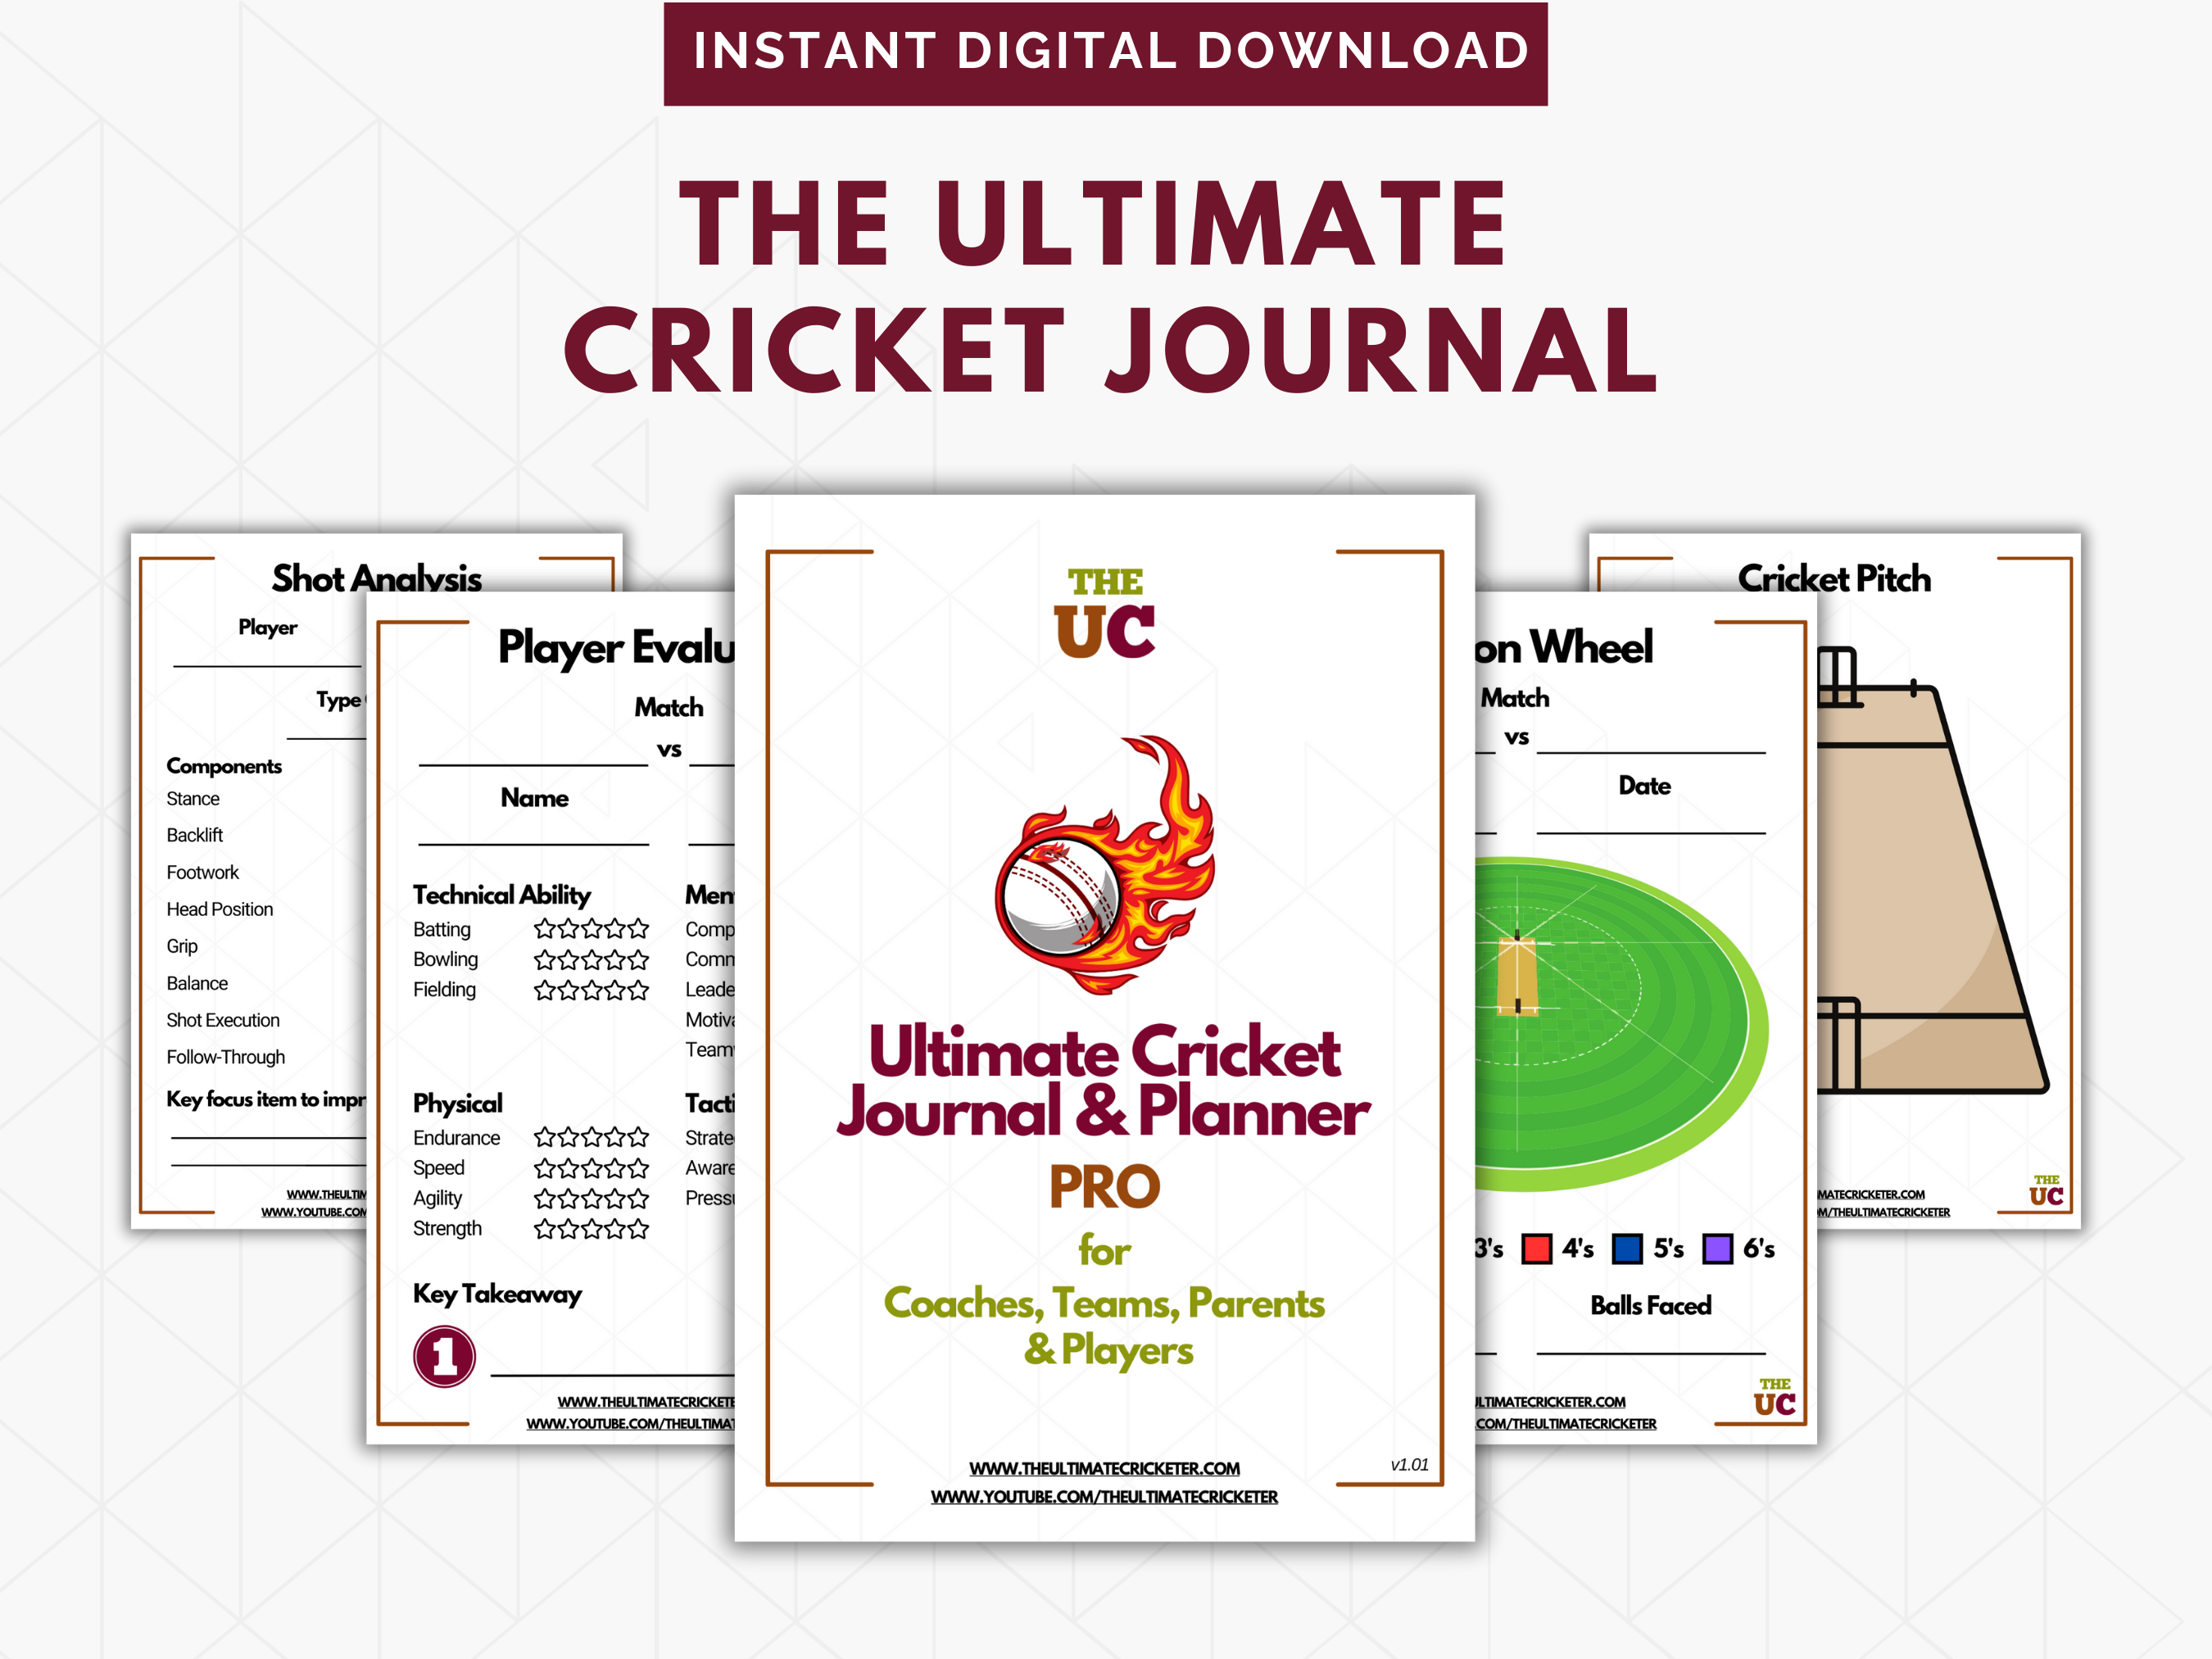 Sample of pages included in the Pro Cricket Journal & Planner